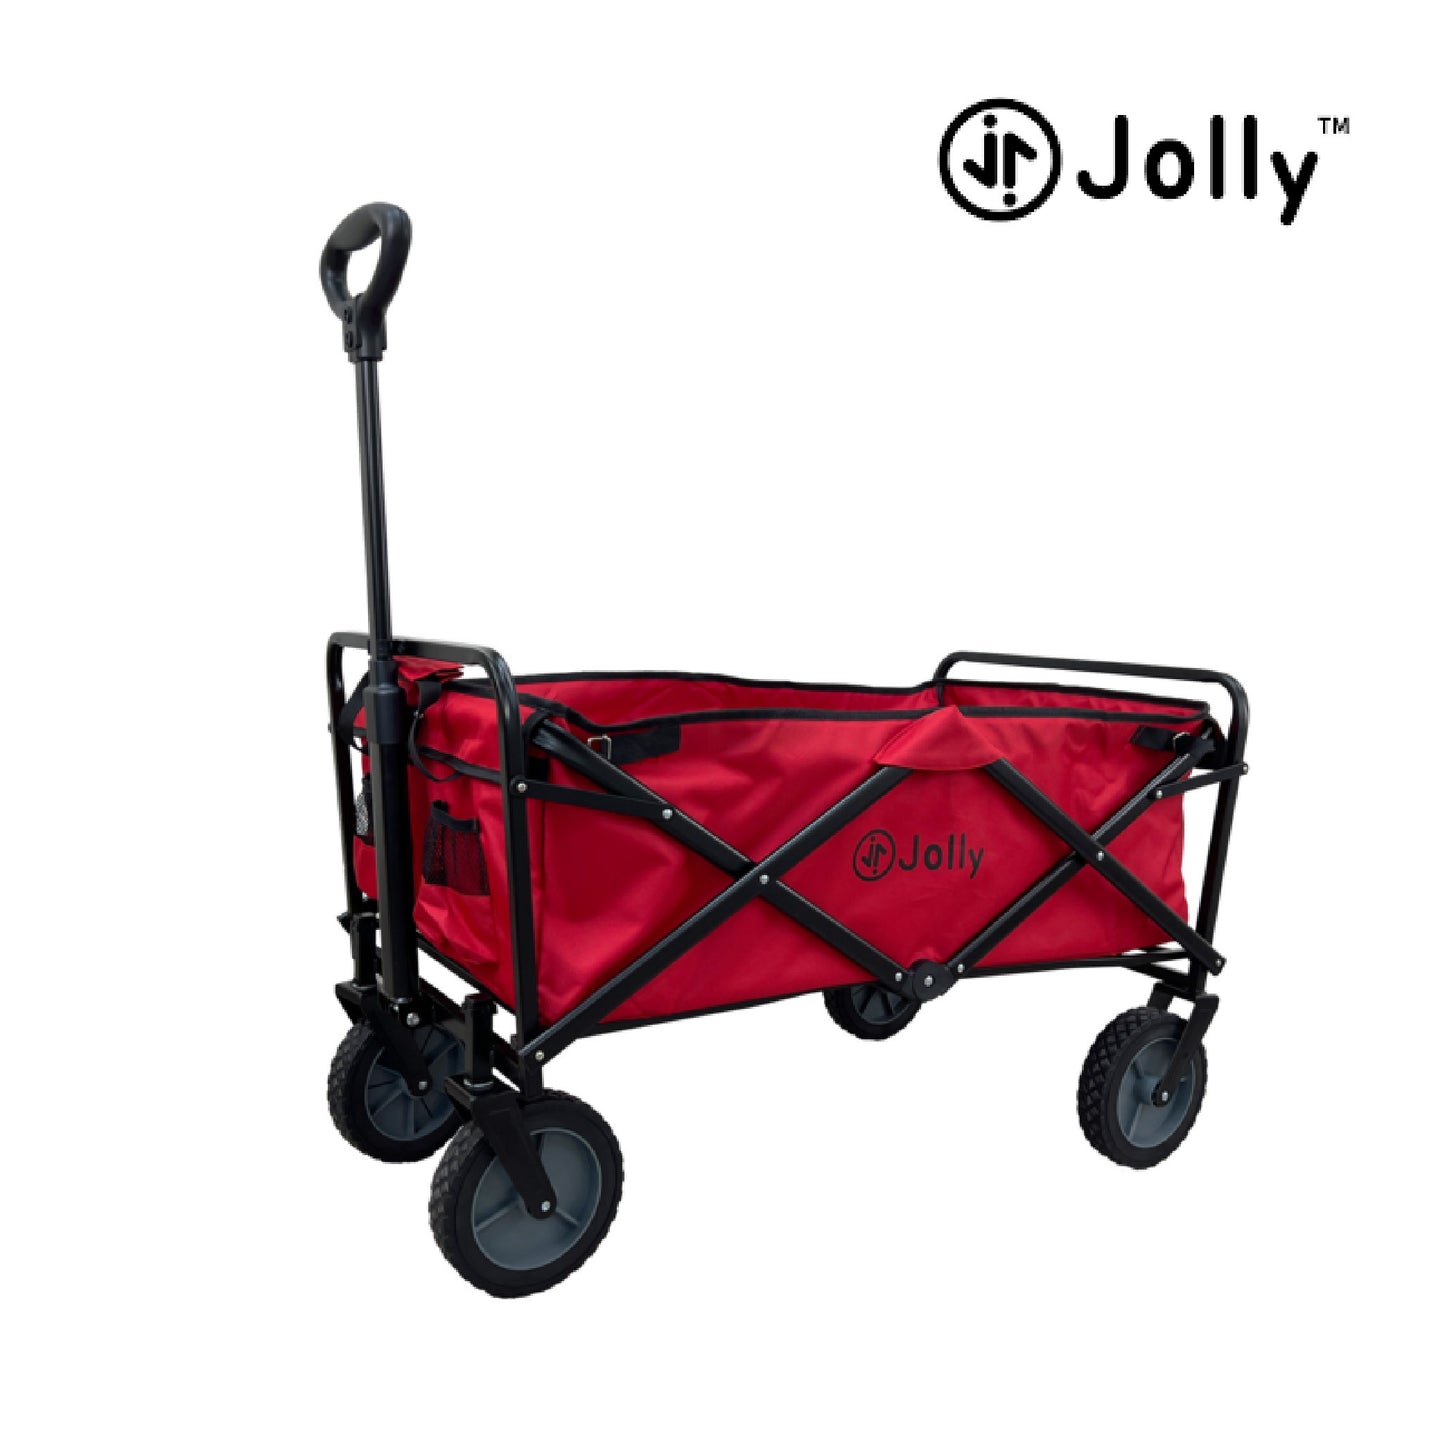 [Jolly UK] Folding trolley - 2 colors available